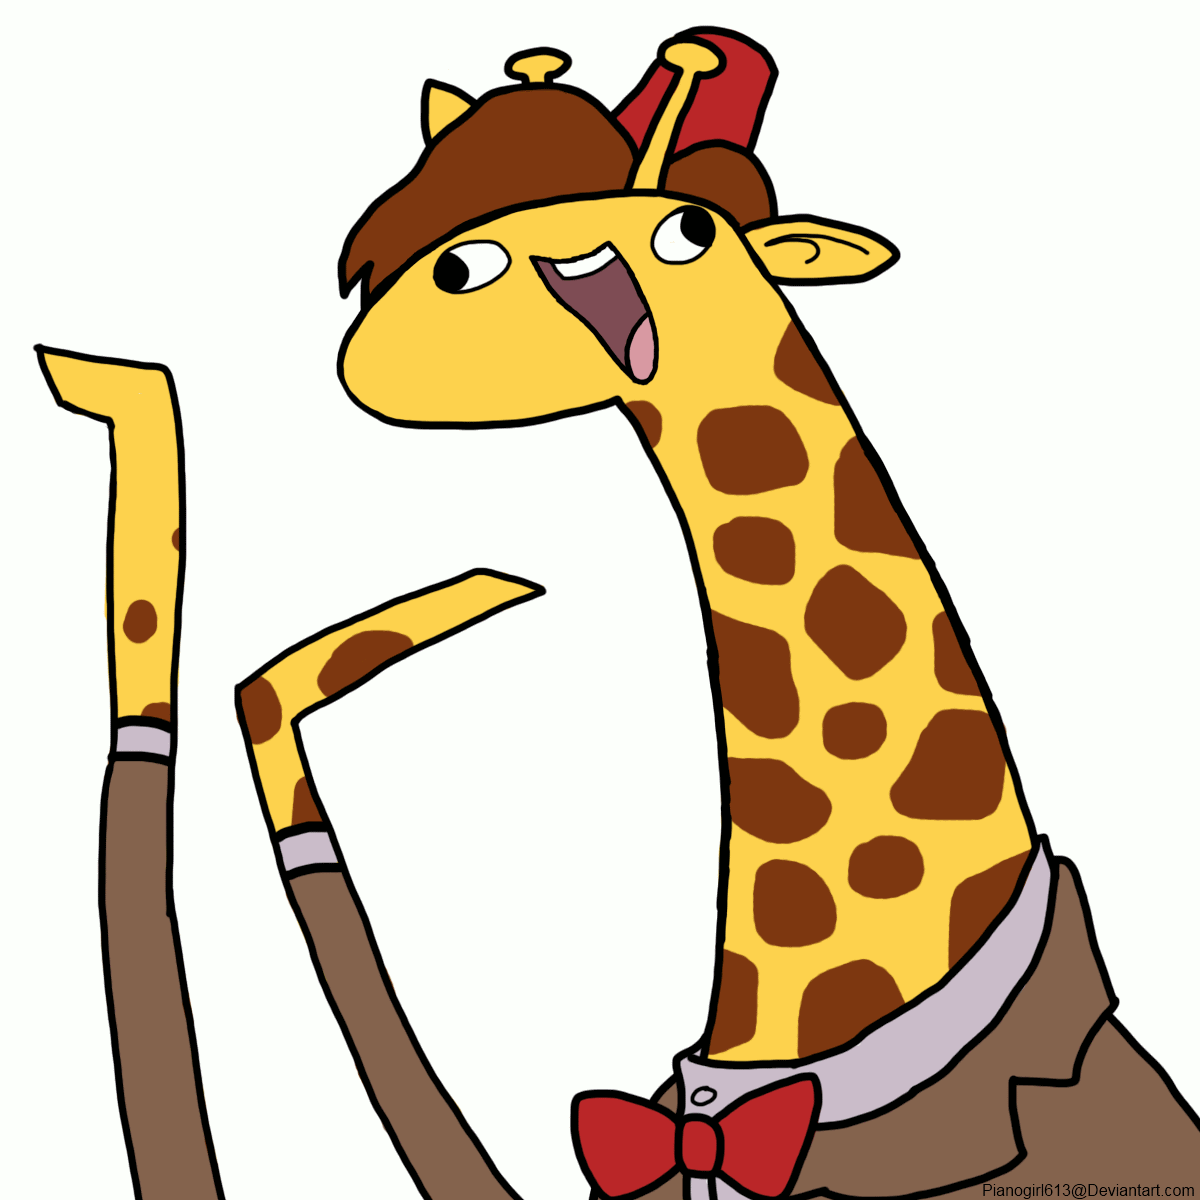 Animated Giraffe Pictures - ClipArt Best